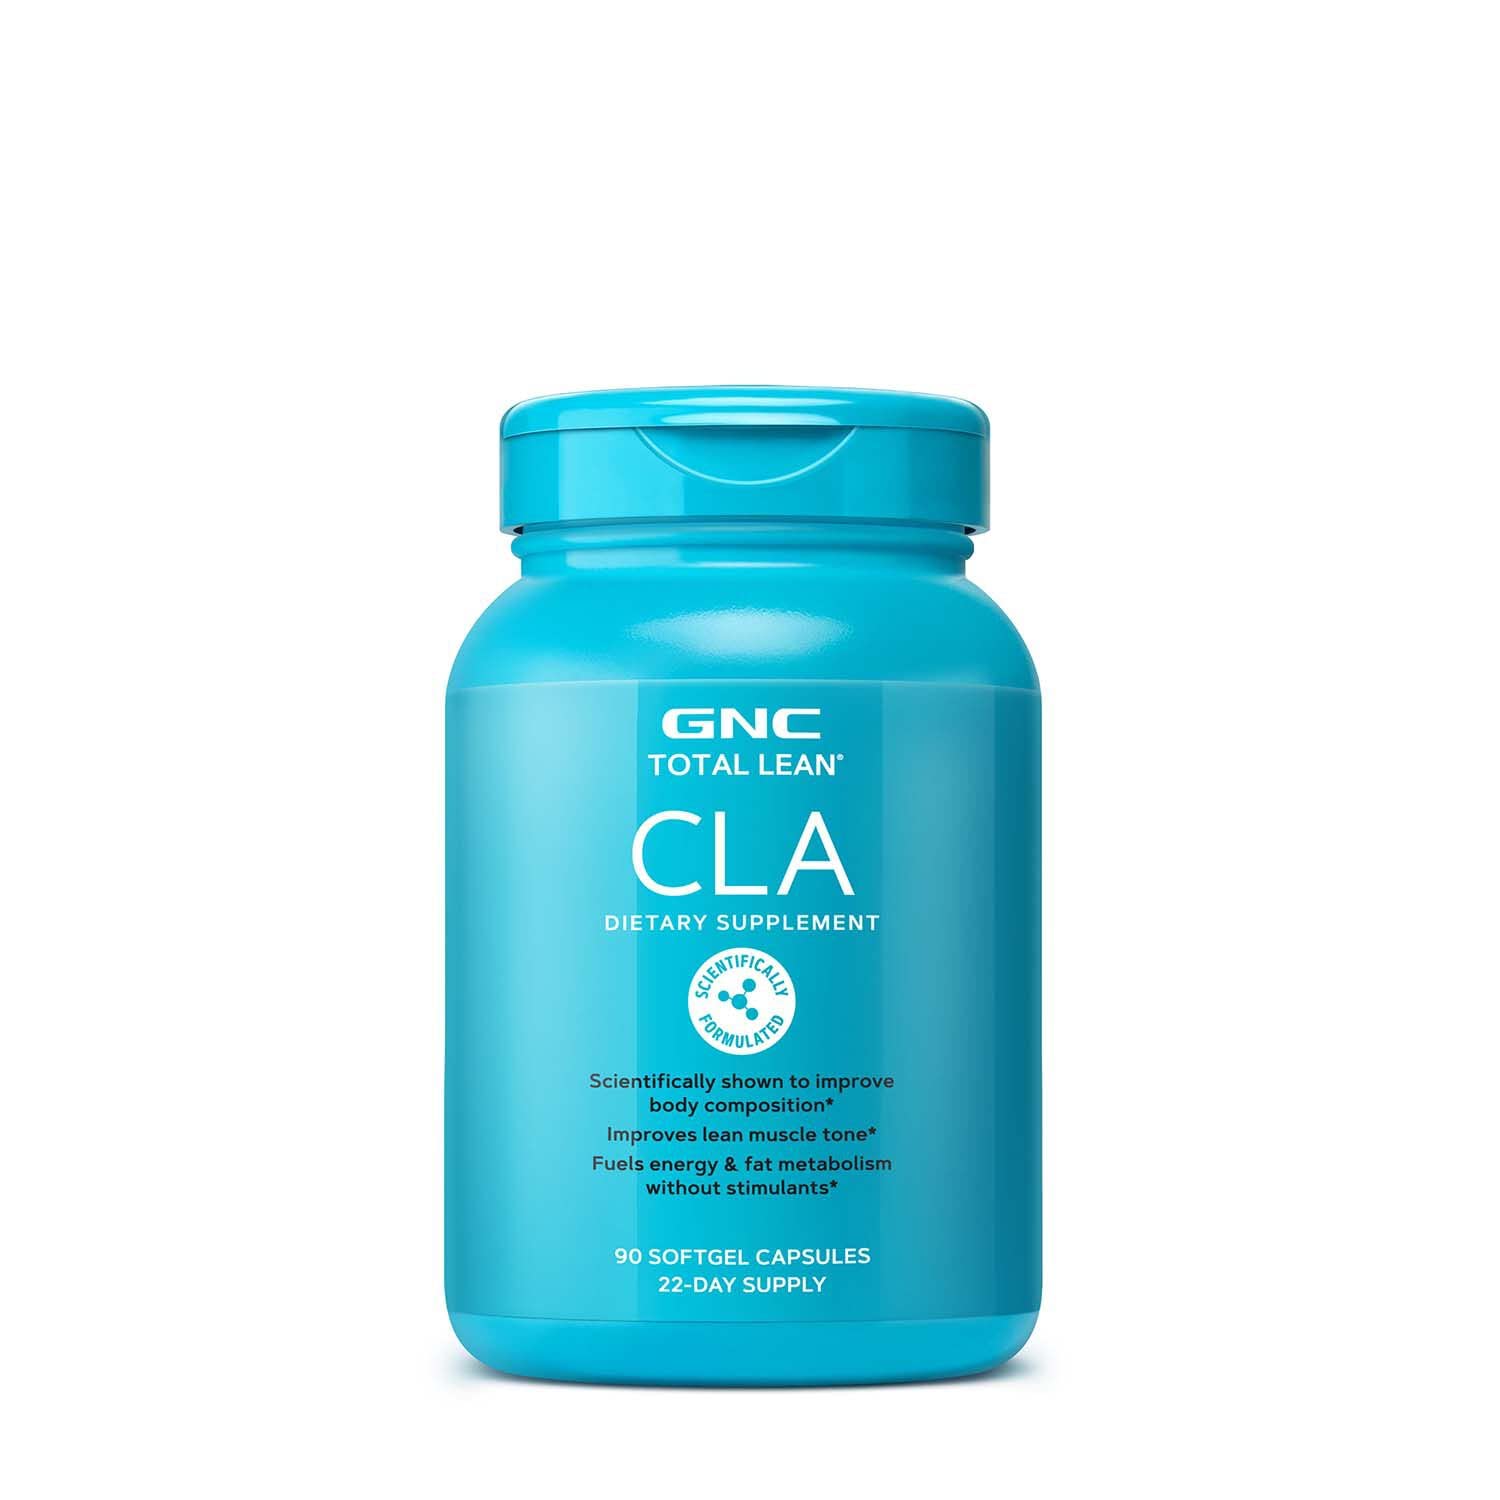 GNC Total Lean CLA | Improves Body Composition & Lean Muscle Tone, Fuels Fat Metabolism & Energy Without Stimulants | Gluten Free | 90 Softgels